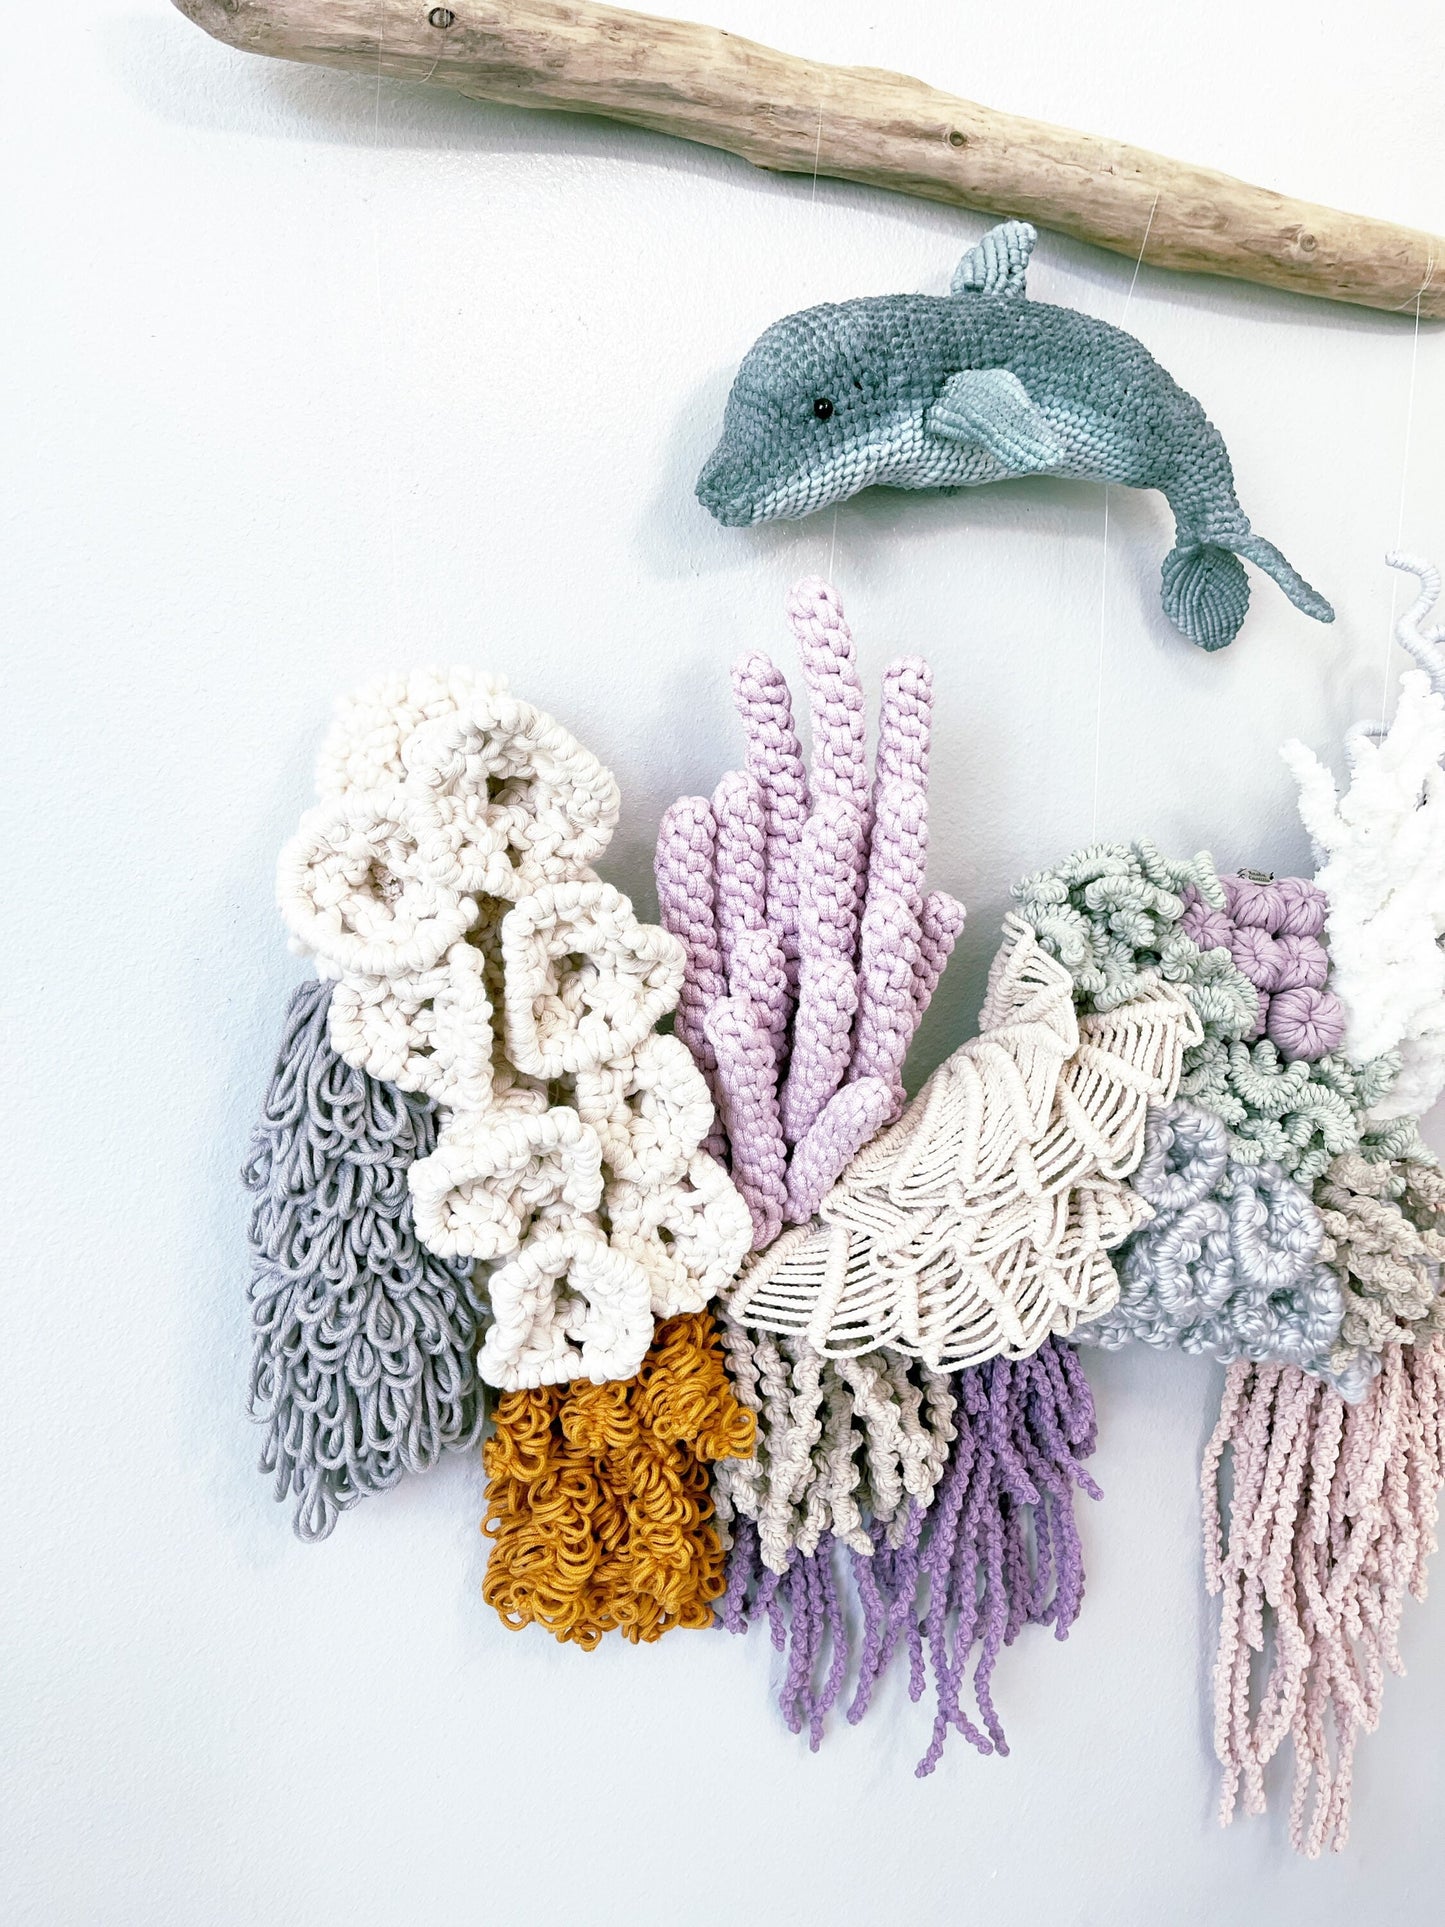 COMMISSION ONLY ART//Macrame Coral Reef Art/ Fiber Coral Reef/ Barrier reef art / Nautical Macrame Art